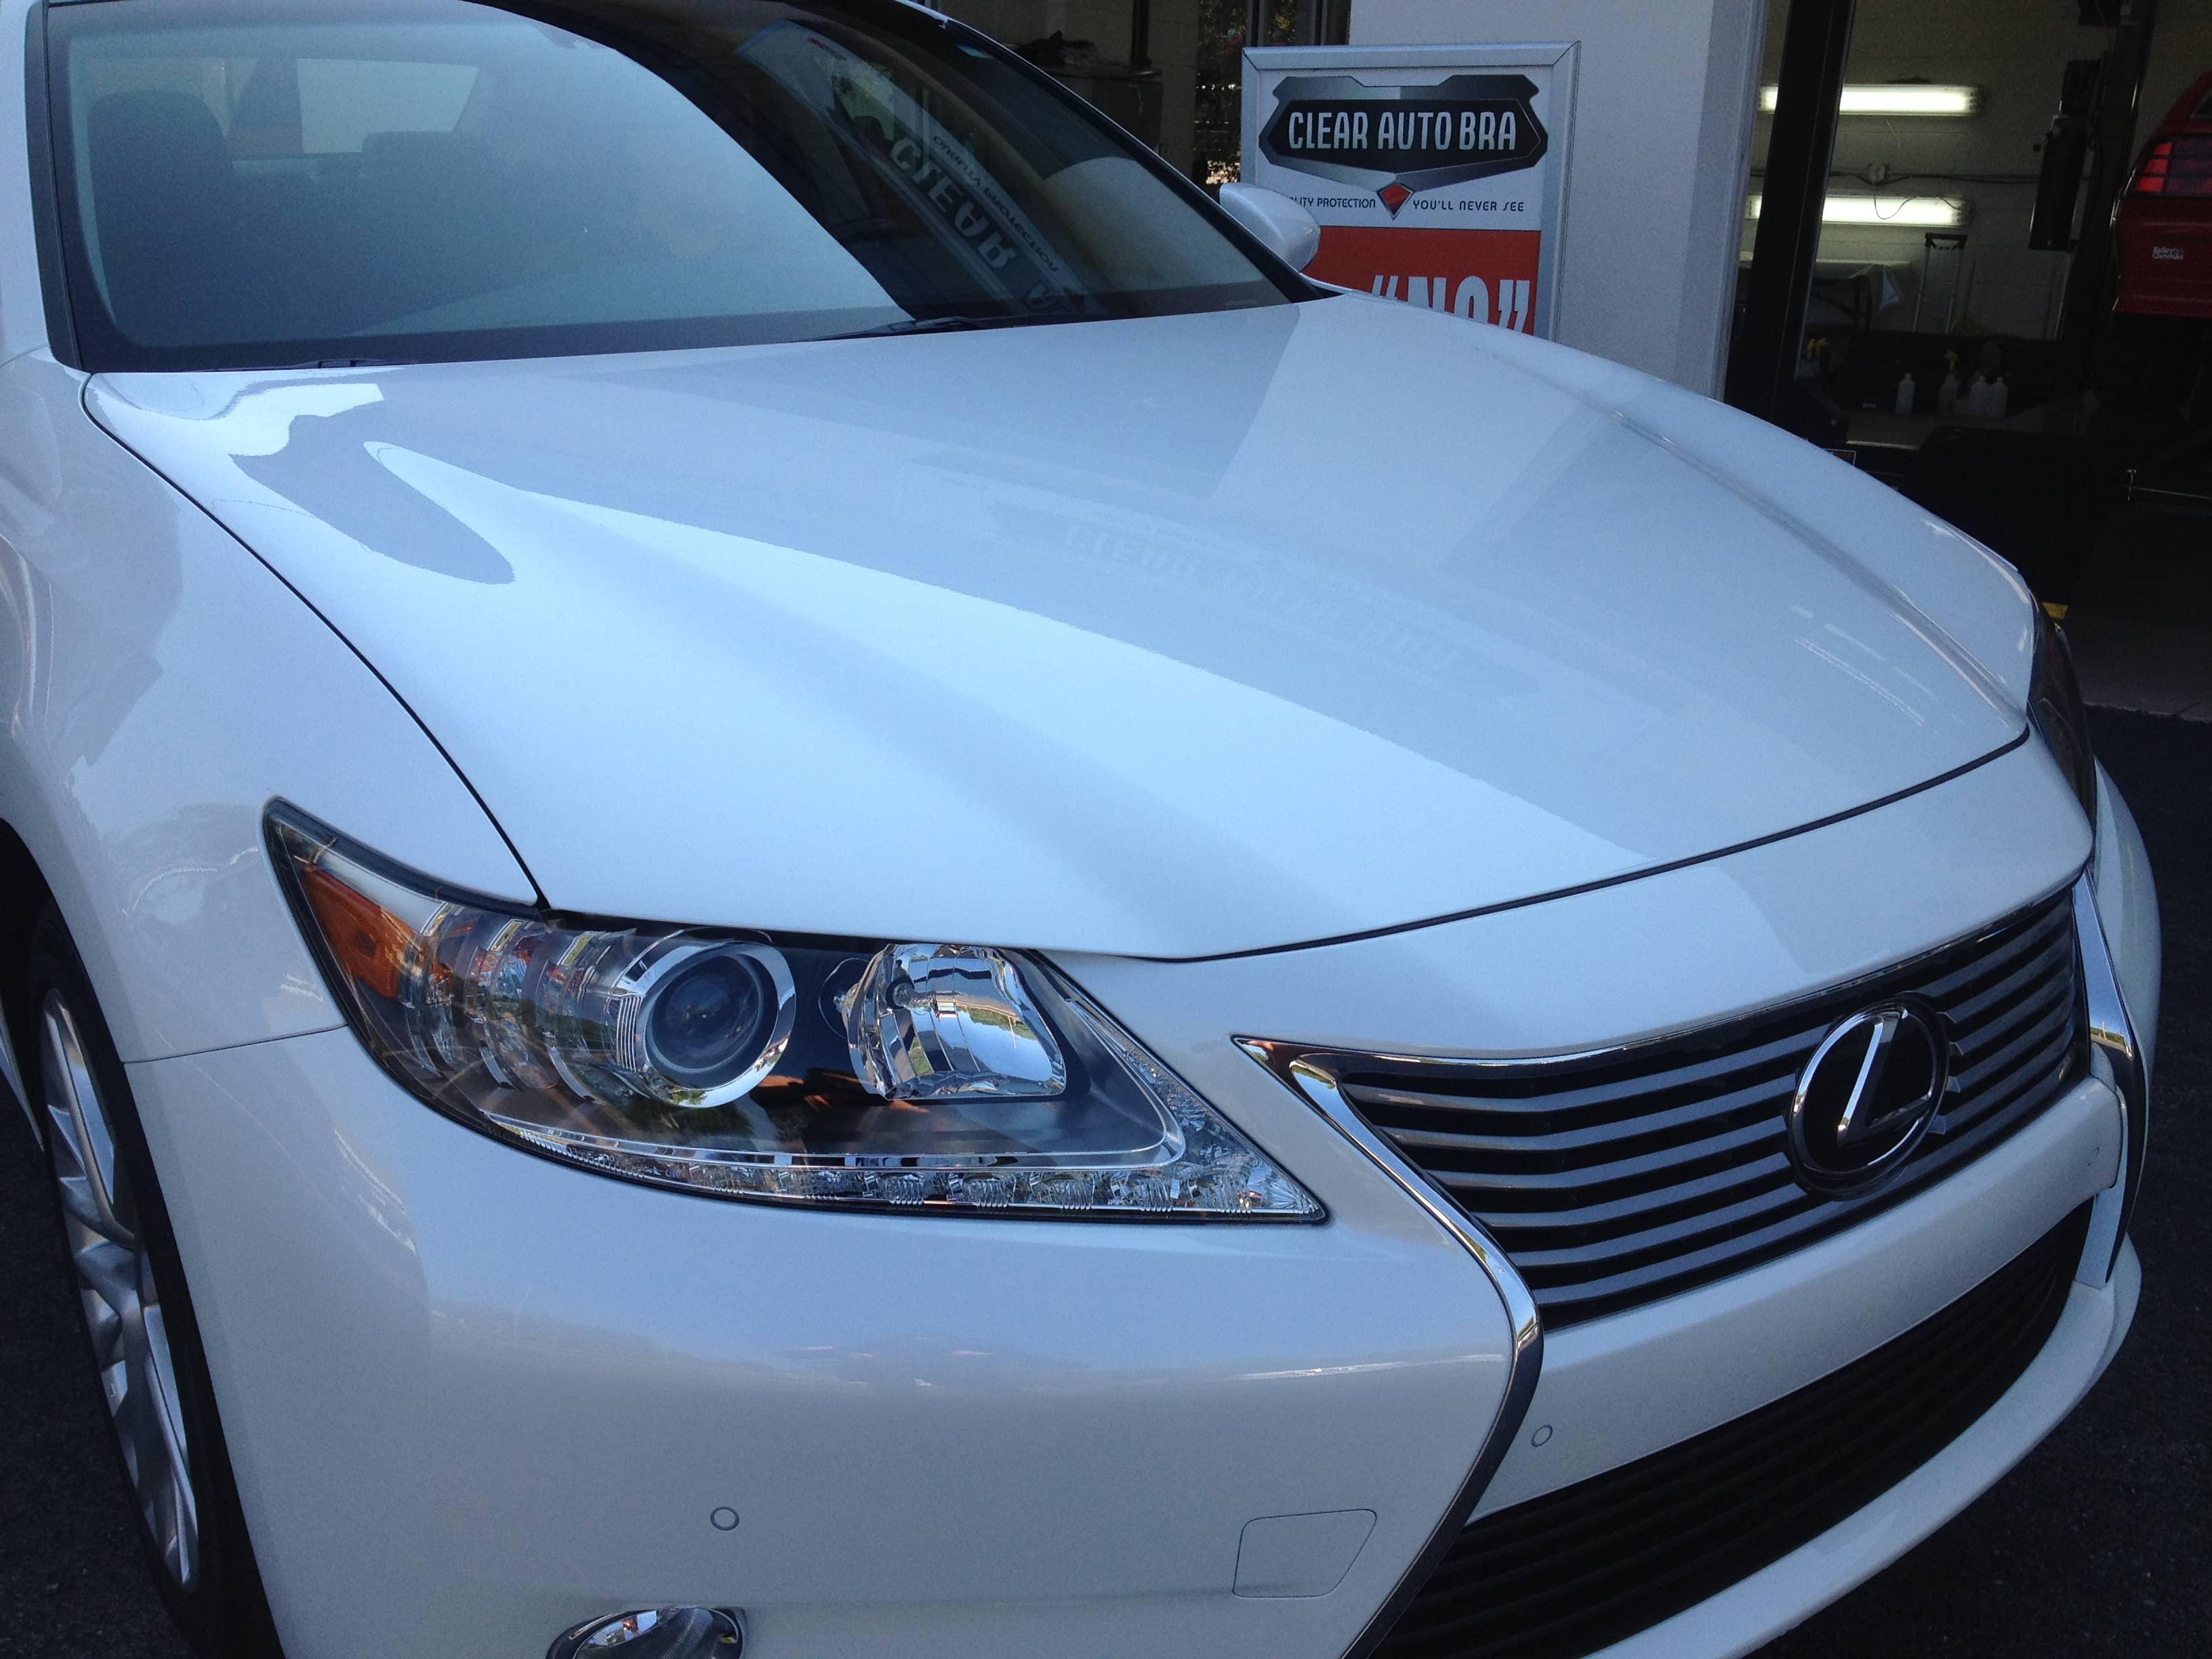 2013 Lexus ES350 protection film for paint chips from Xpel Ultimate